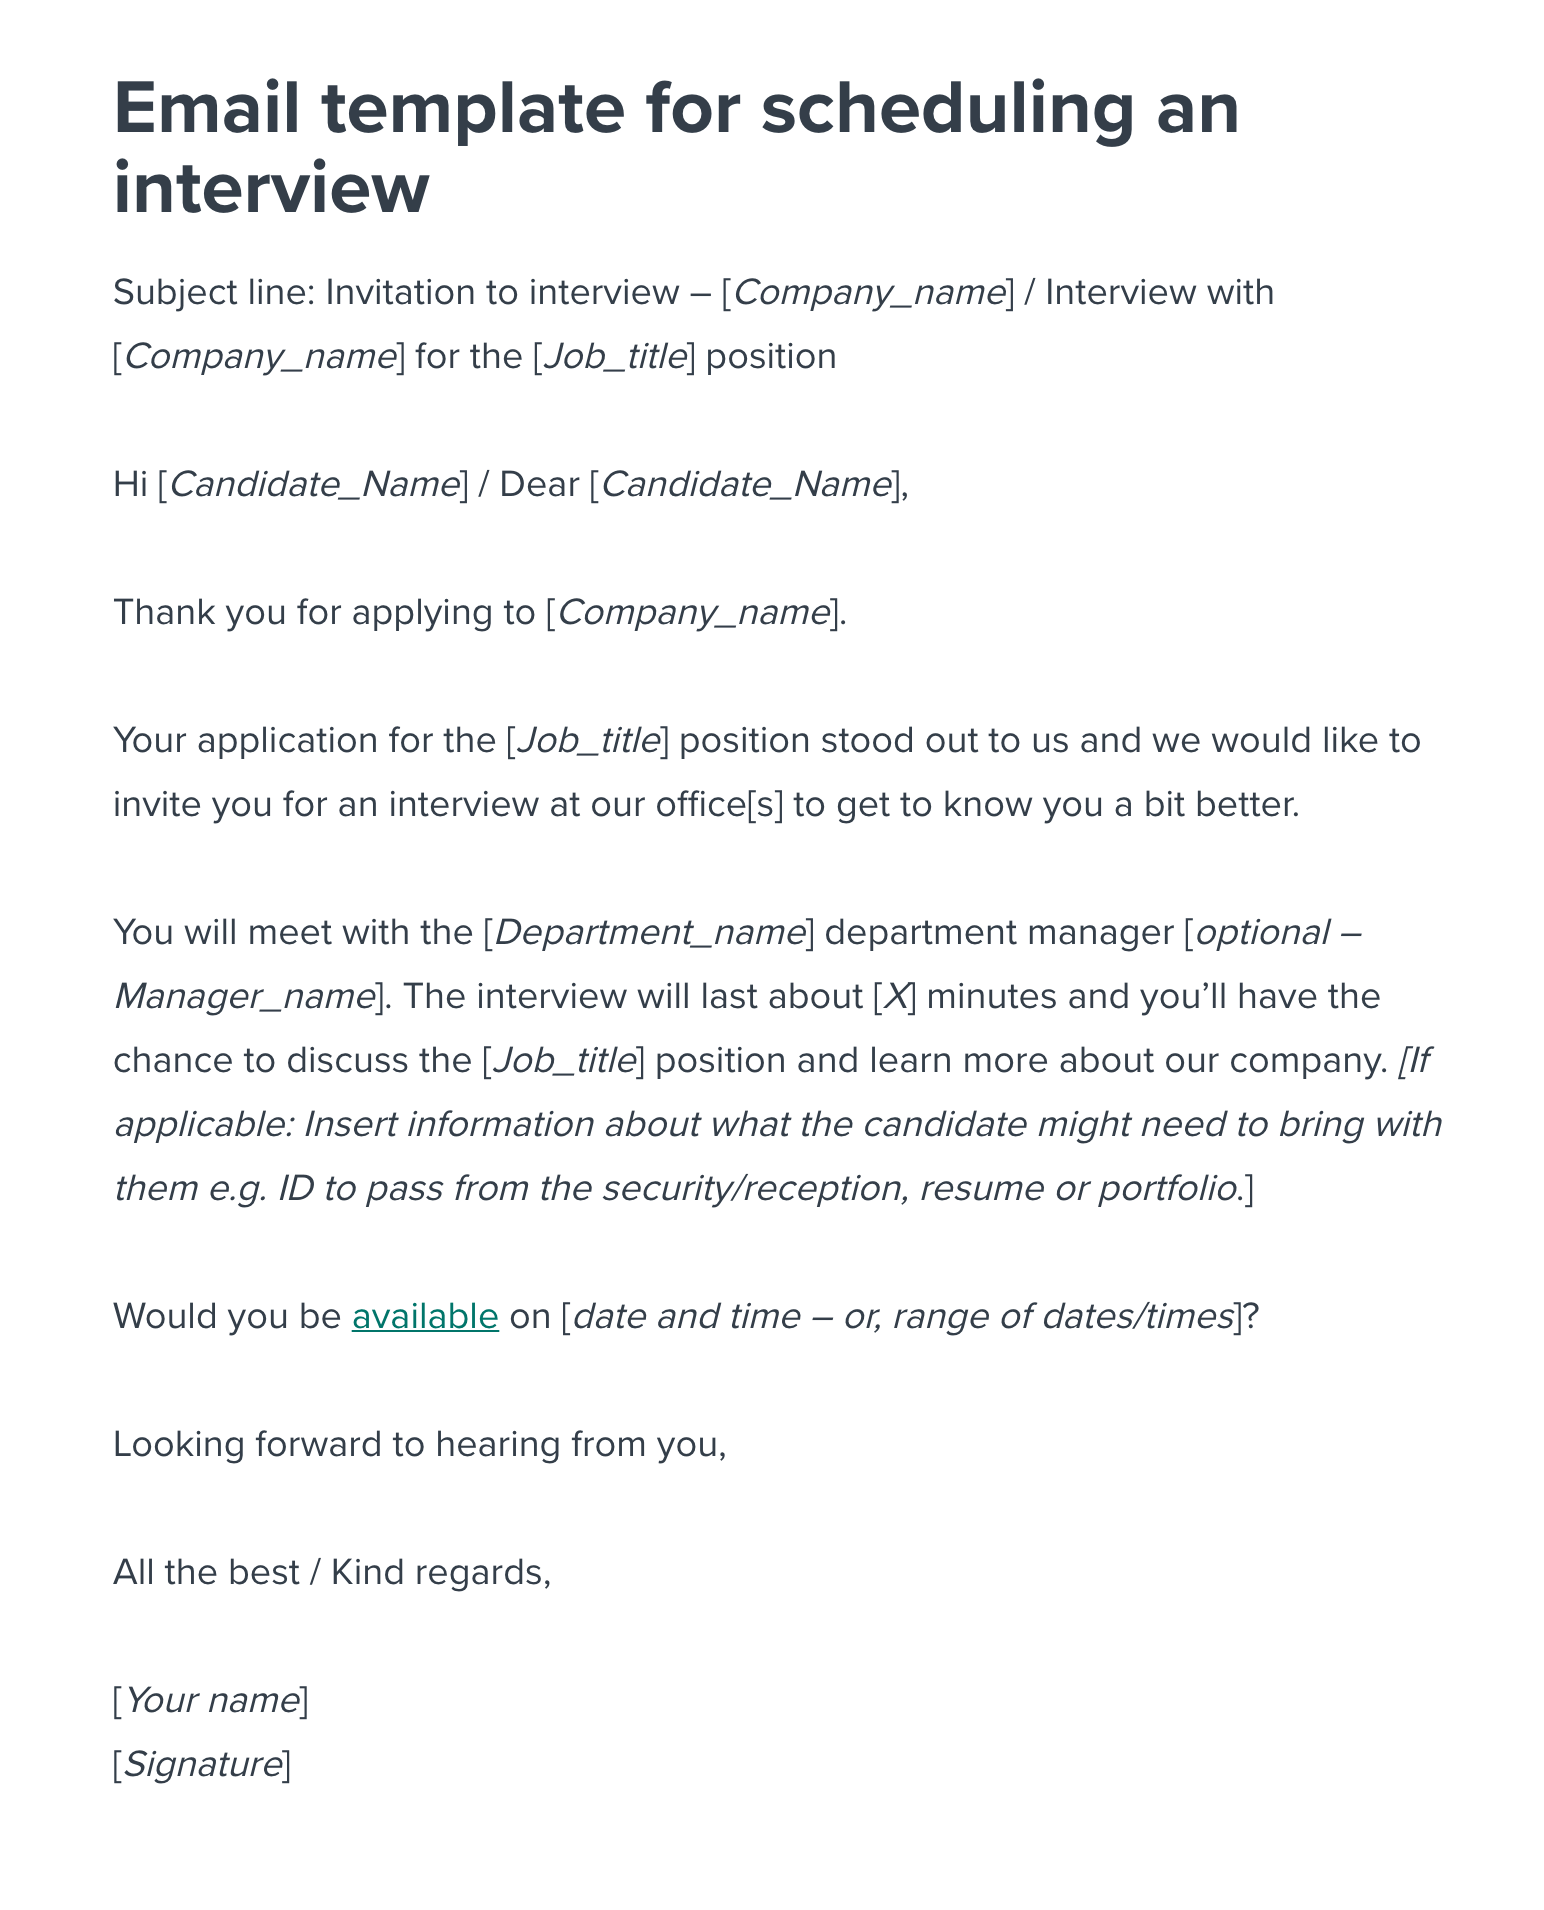 Scheduling an Interview Email Template  Workable